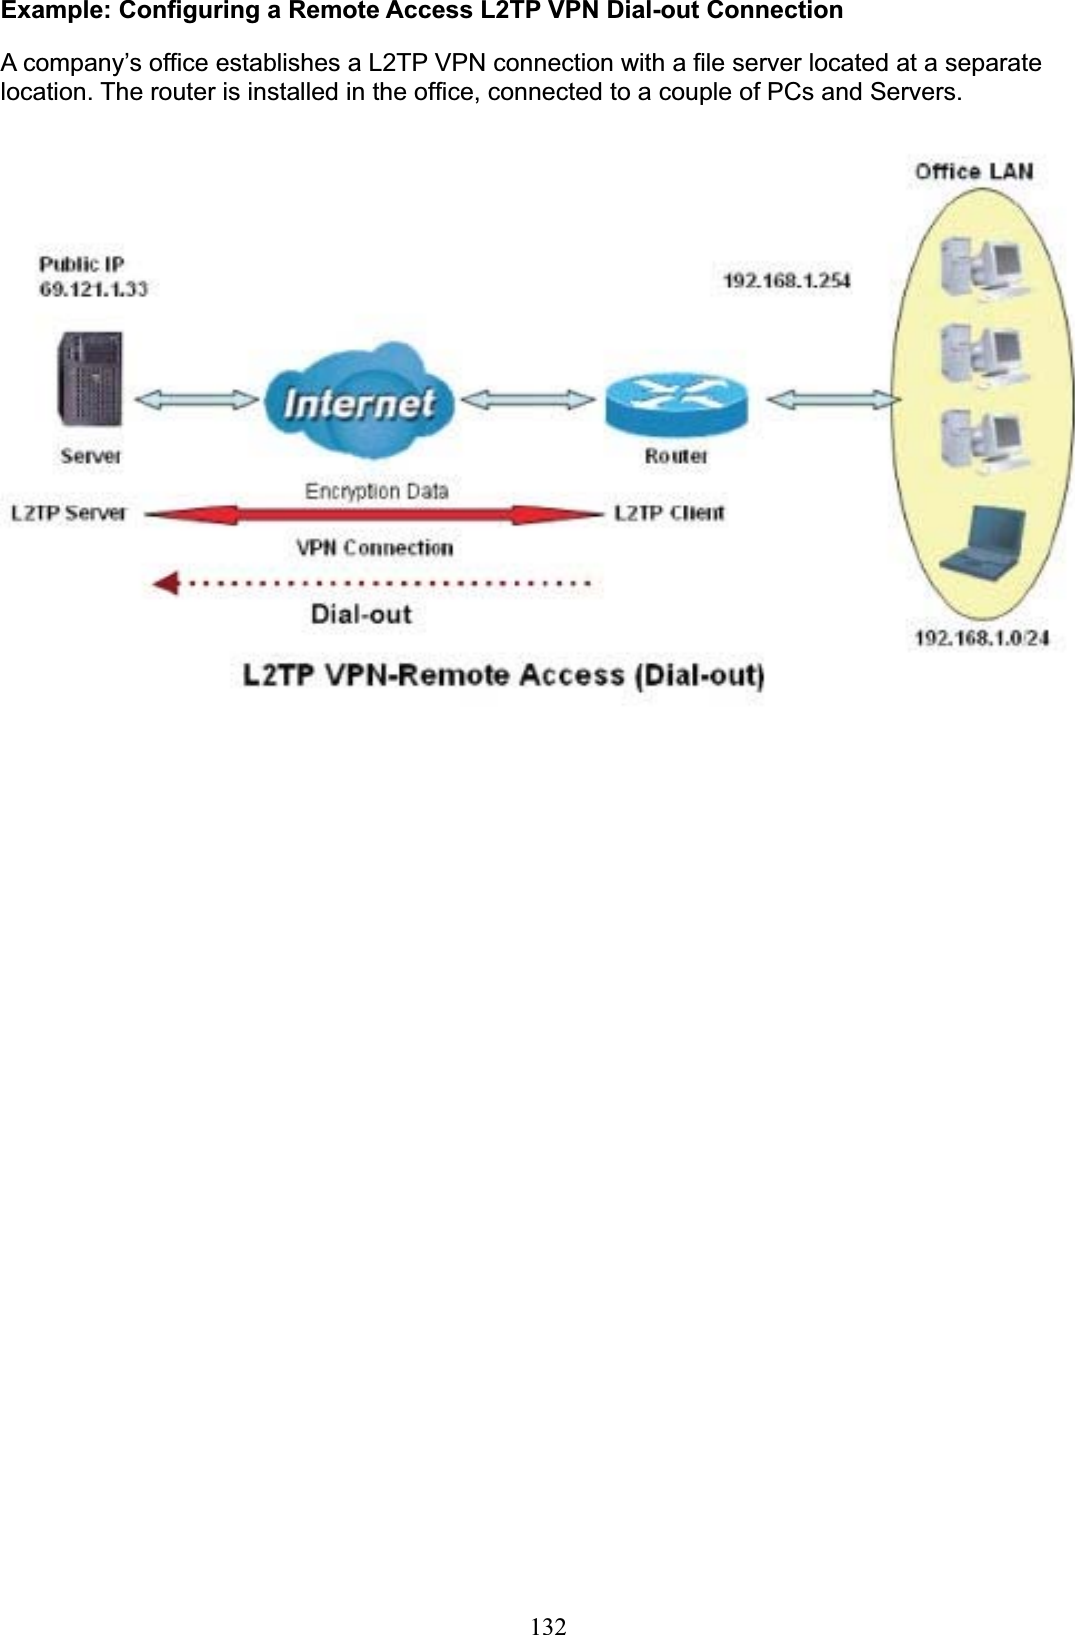 132Example: Configuring a Remote Access L2TP VPN Dial-out ConnectionA company’s office establishes a L2TP VPN connection with a file server located at a separate location. The router is installed in the office, connected to a couple of PCs and Servers. 